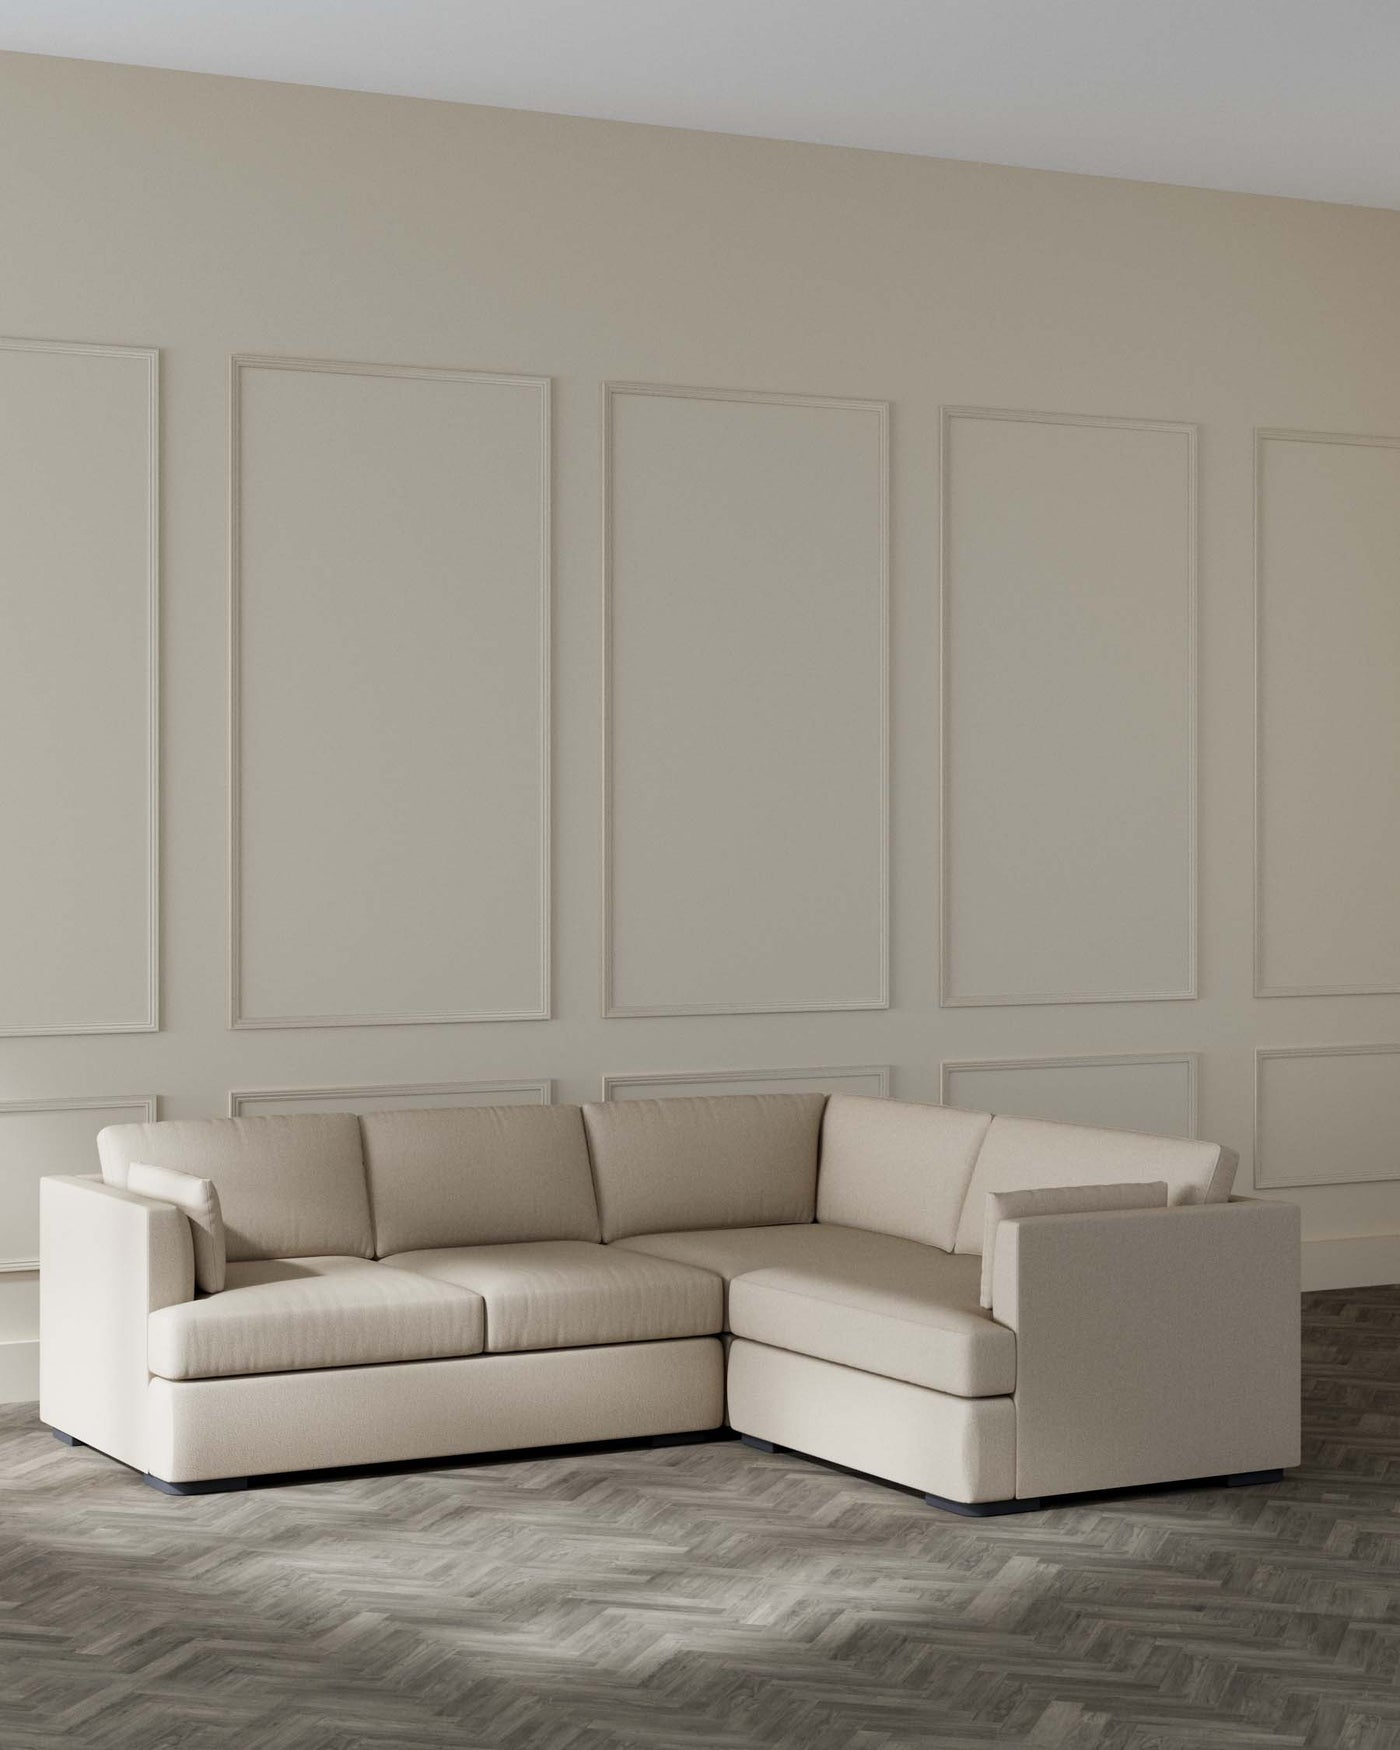 A contemporary beige sectional corner sofa with a minimalist design, featuring clean lines, and plush cushions, set on a sleek, low-profile base in a modern living room with herringbone-patterned wooden flooring and panelled walls.